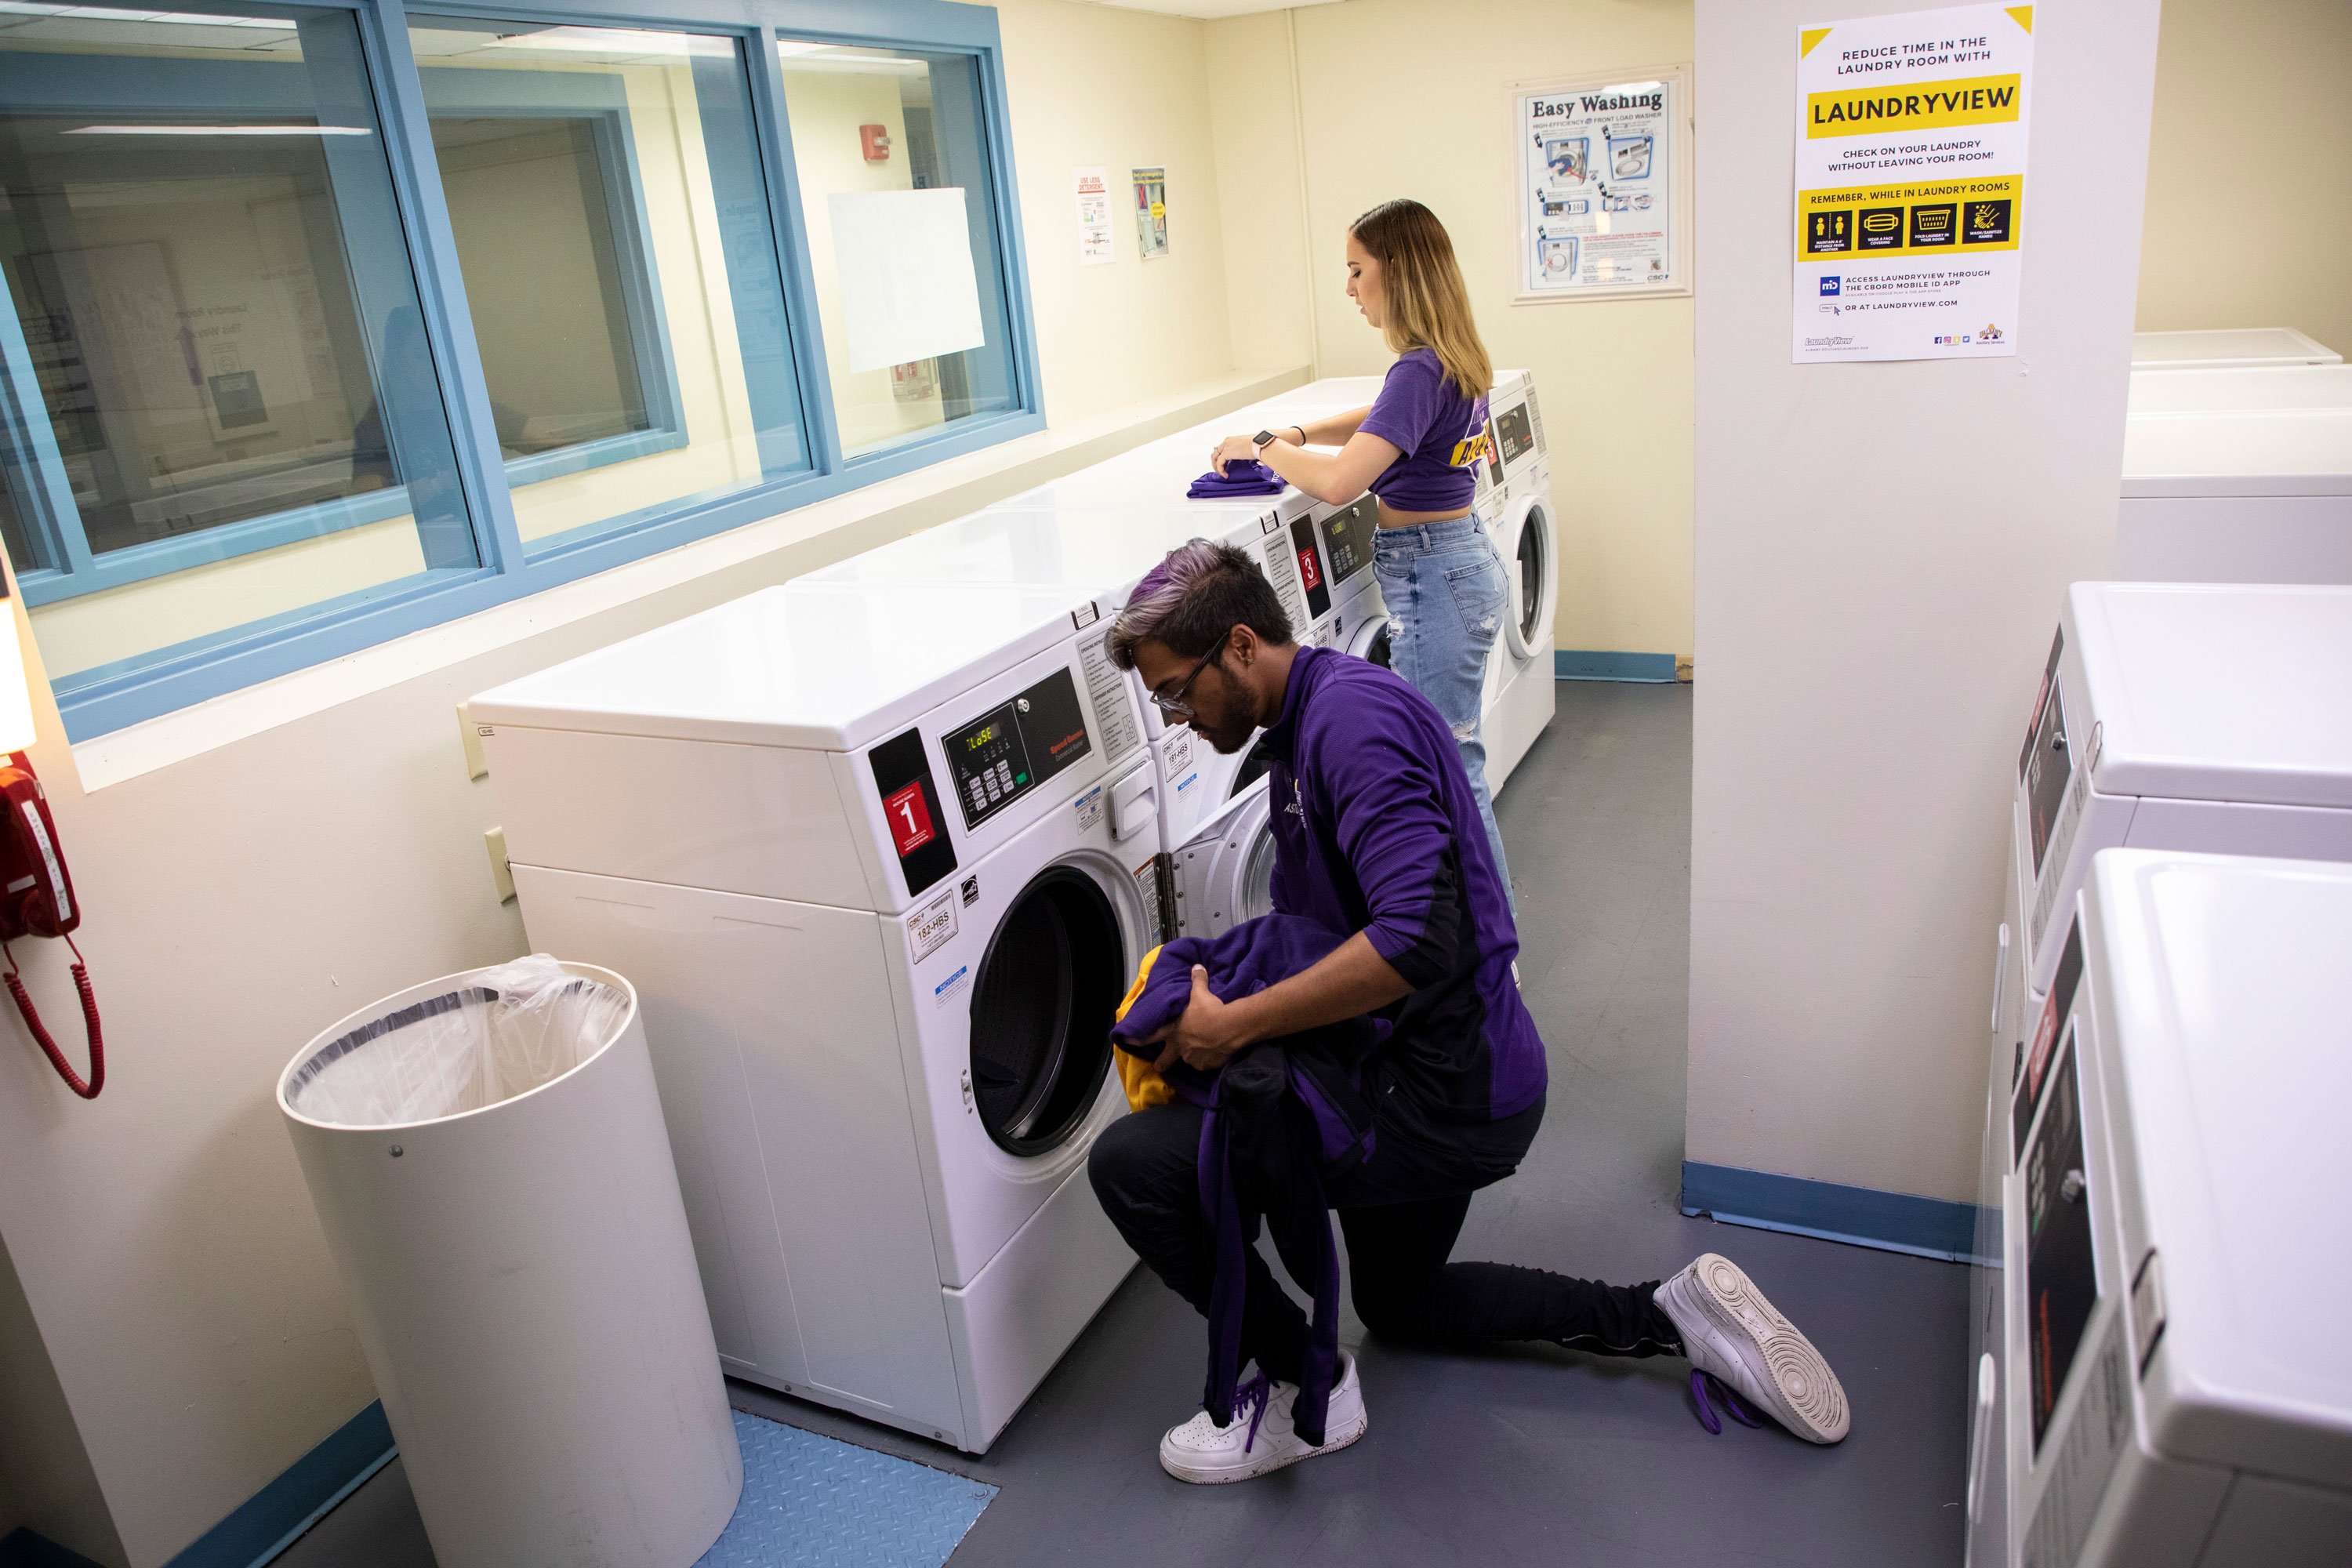 One student unloads a laundry machine, while another folds clothing, inside a laundry room